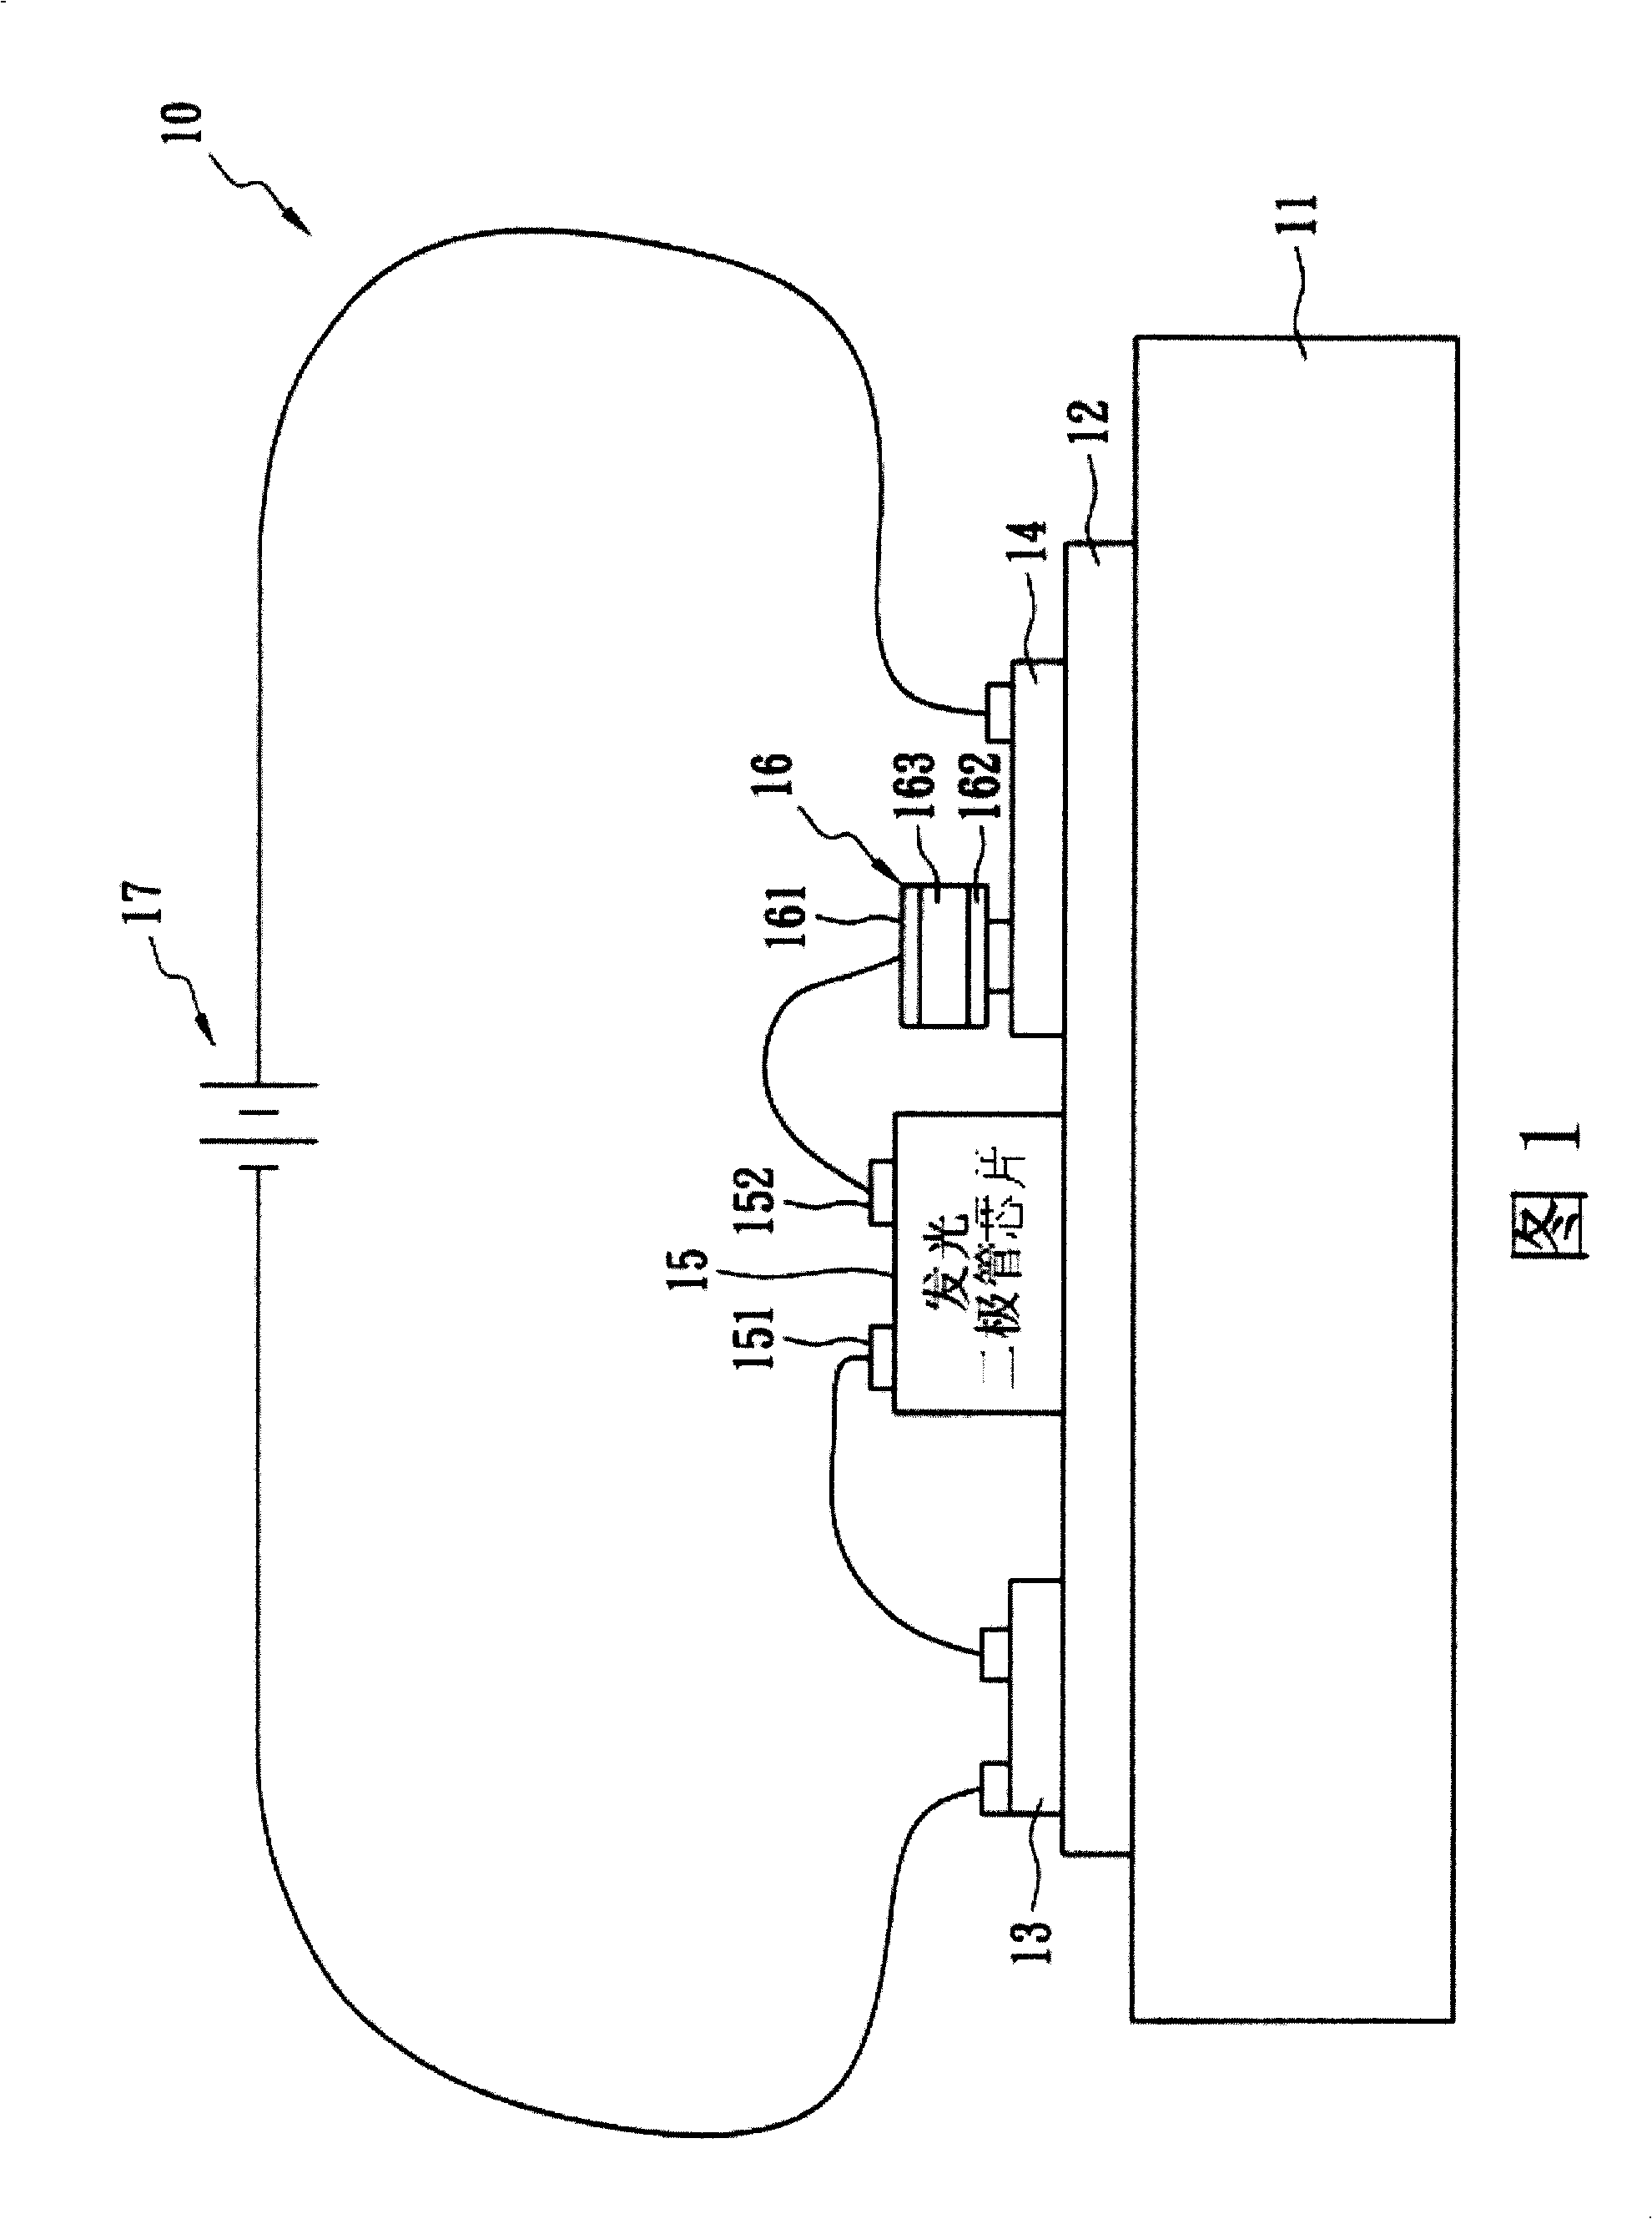 LED device with temp. control function